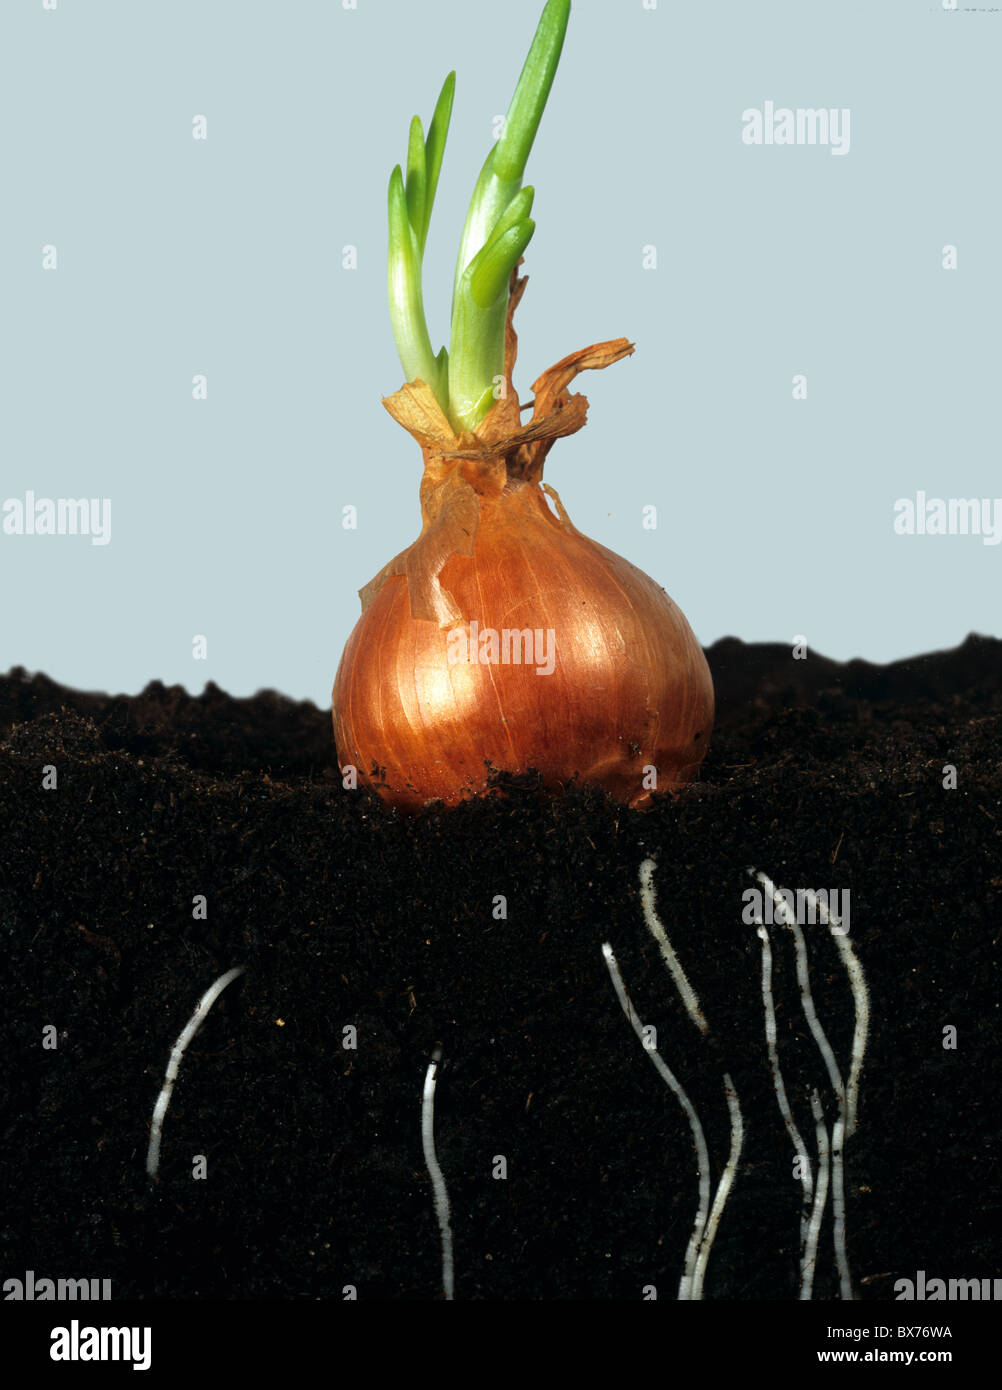 Onion bulb beginning to shoot and develop roots in the soil Stock Photo